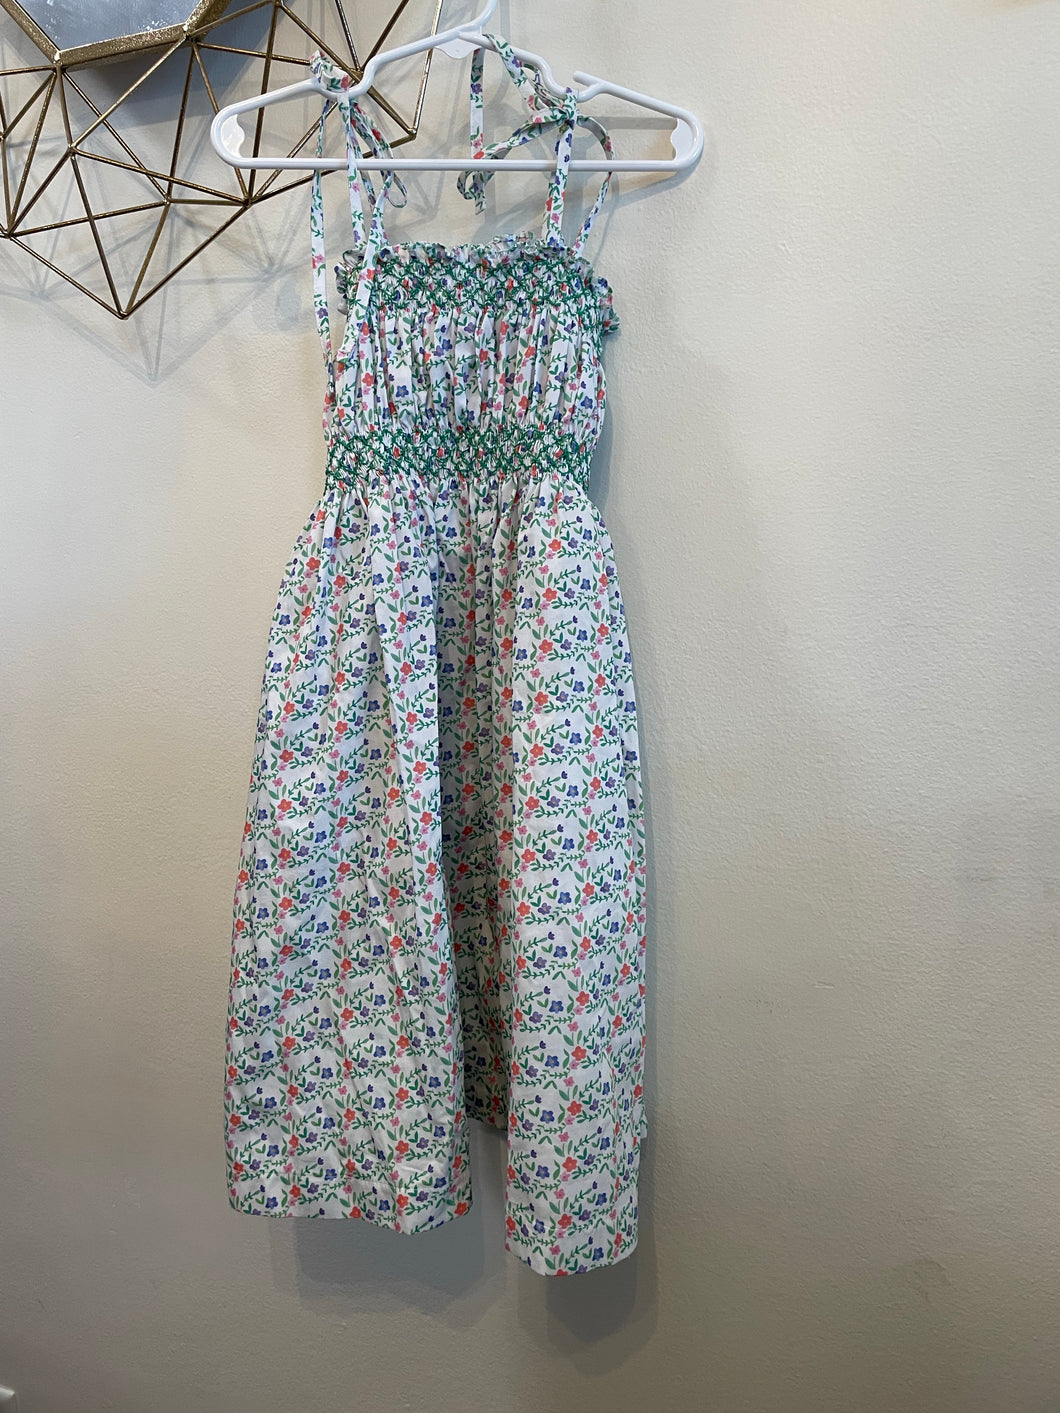 Peggy Green size 8 dress